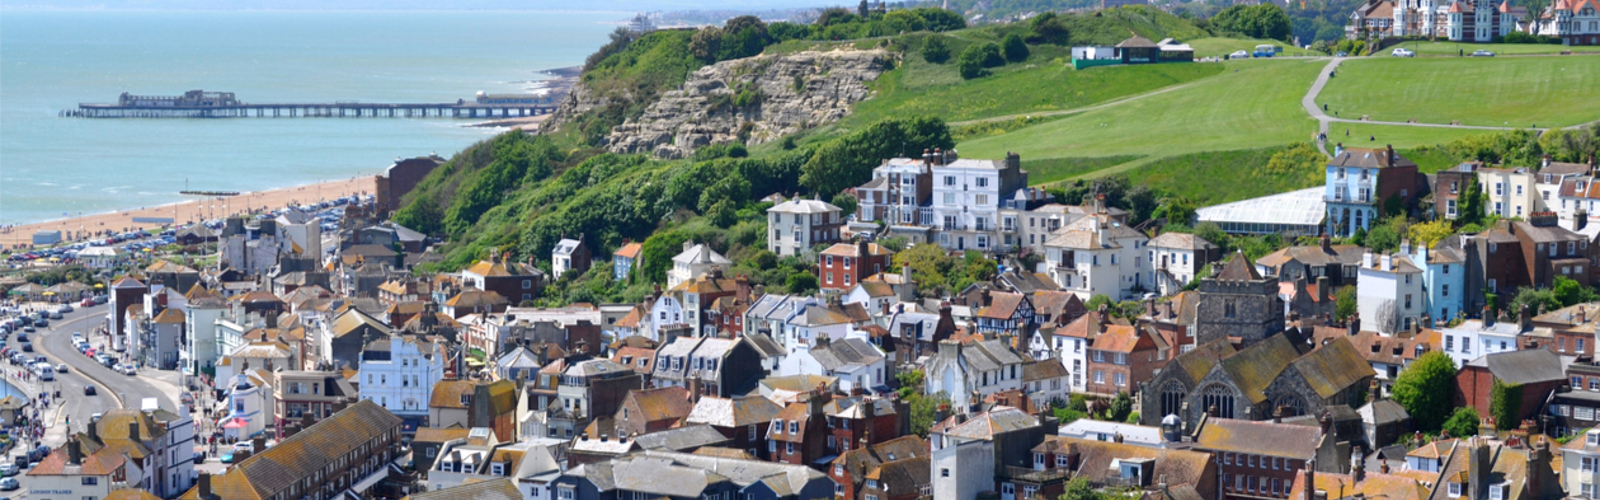 View over Hastings, East Sussex